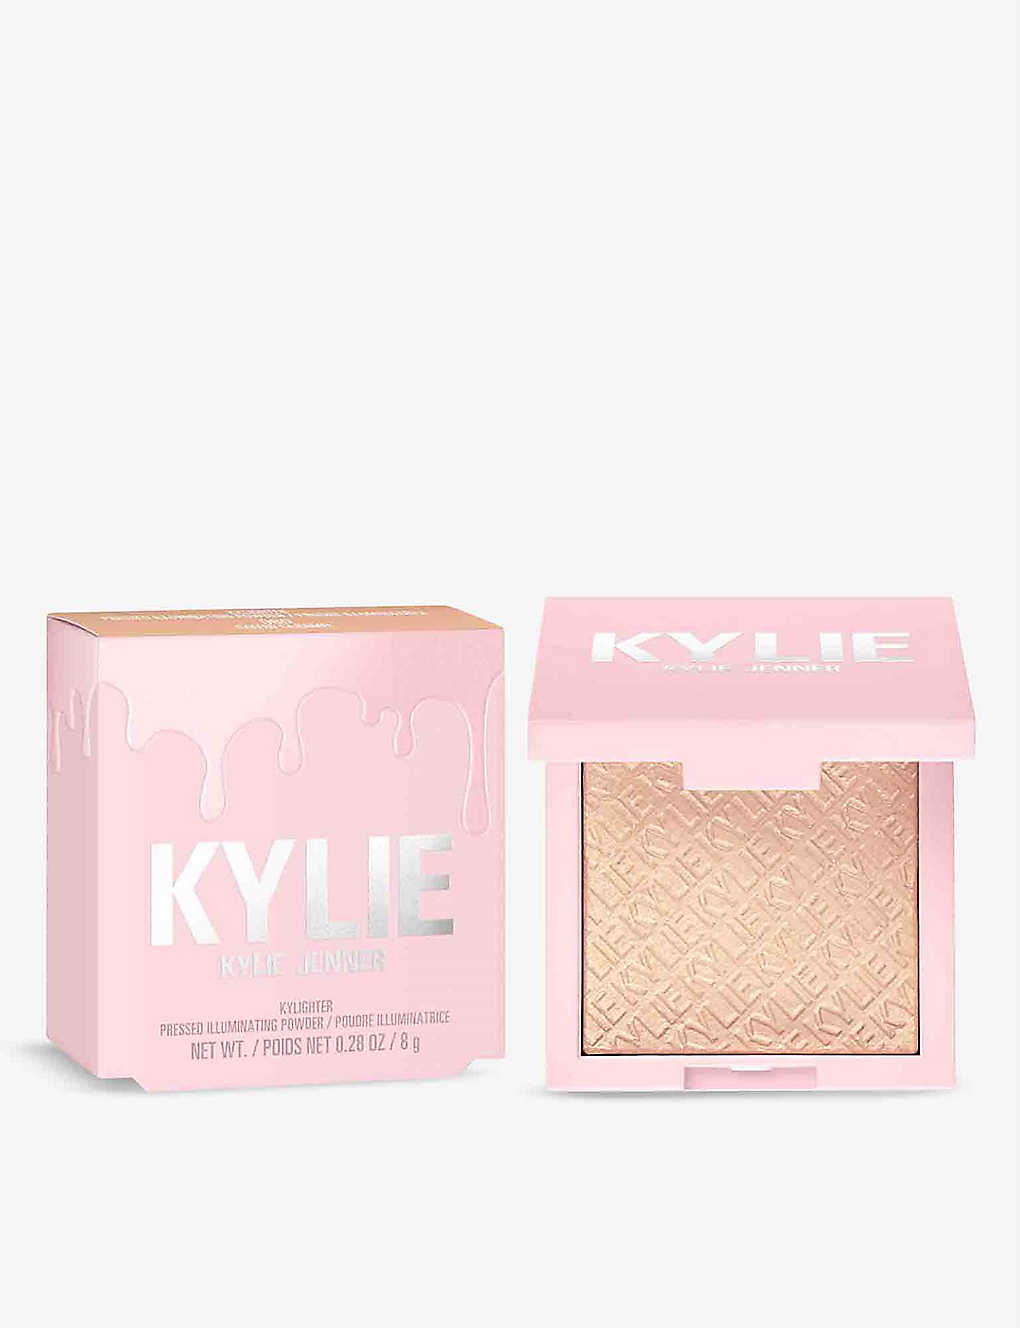 Kylie By Kylie Jenner Kylighter Illuminating Powder 8g In 080 Salted Caramel